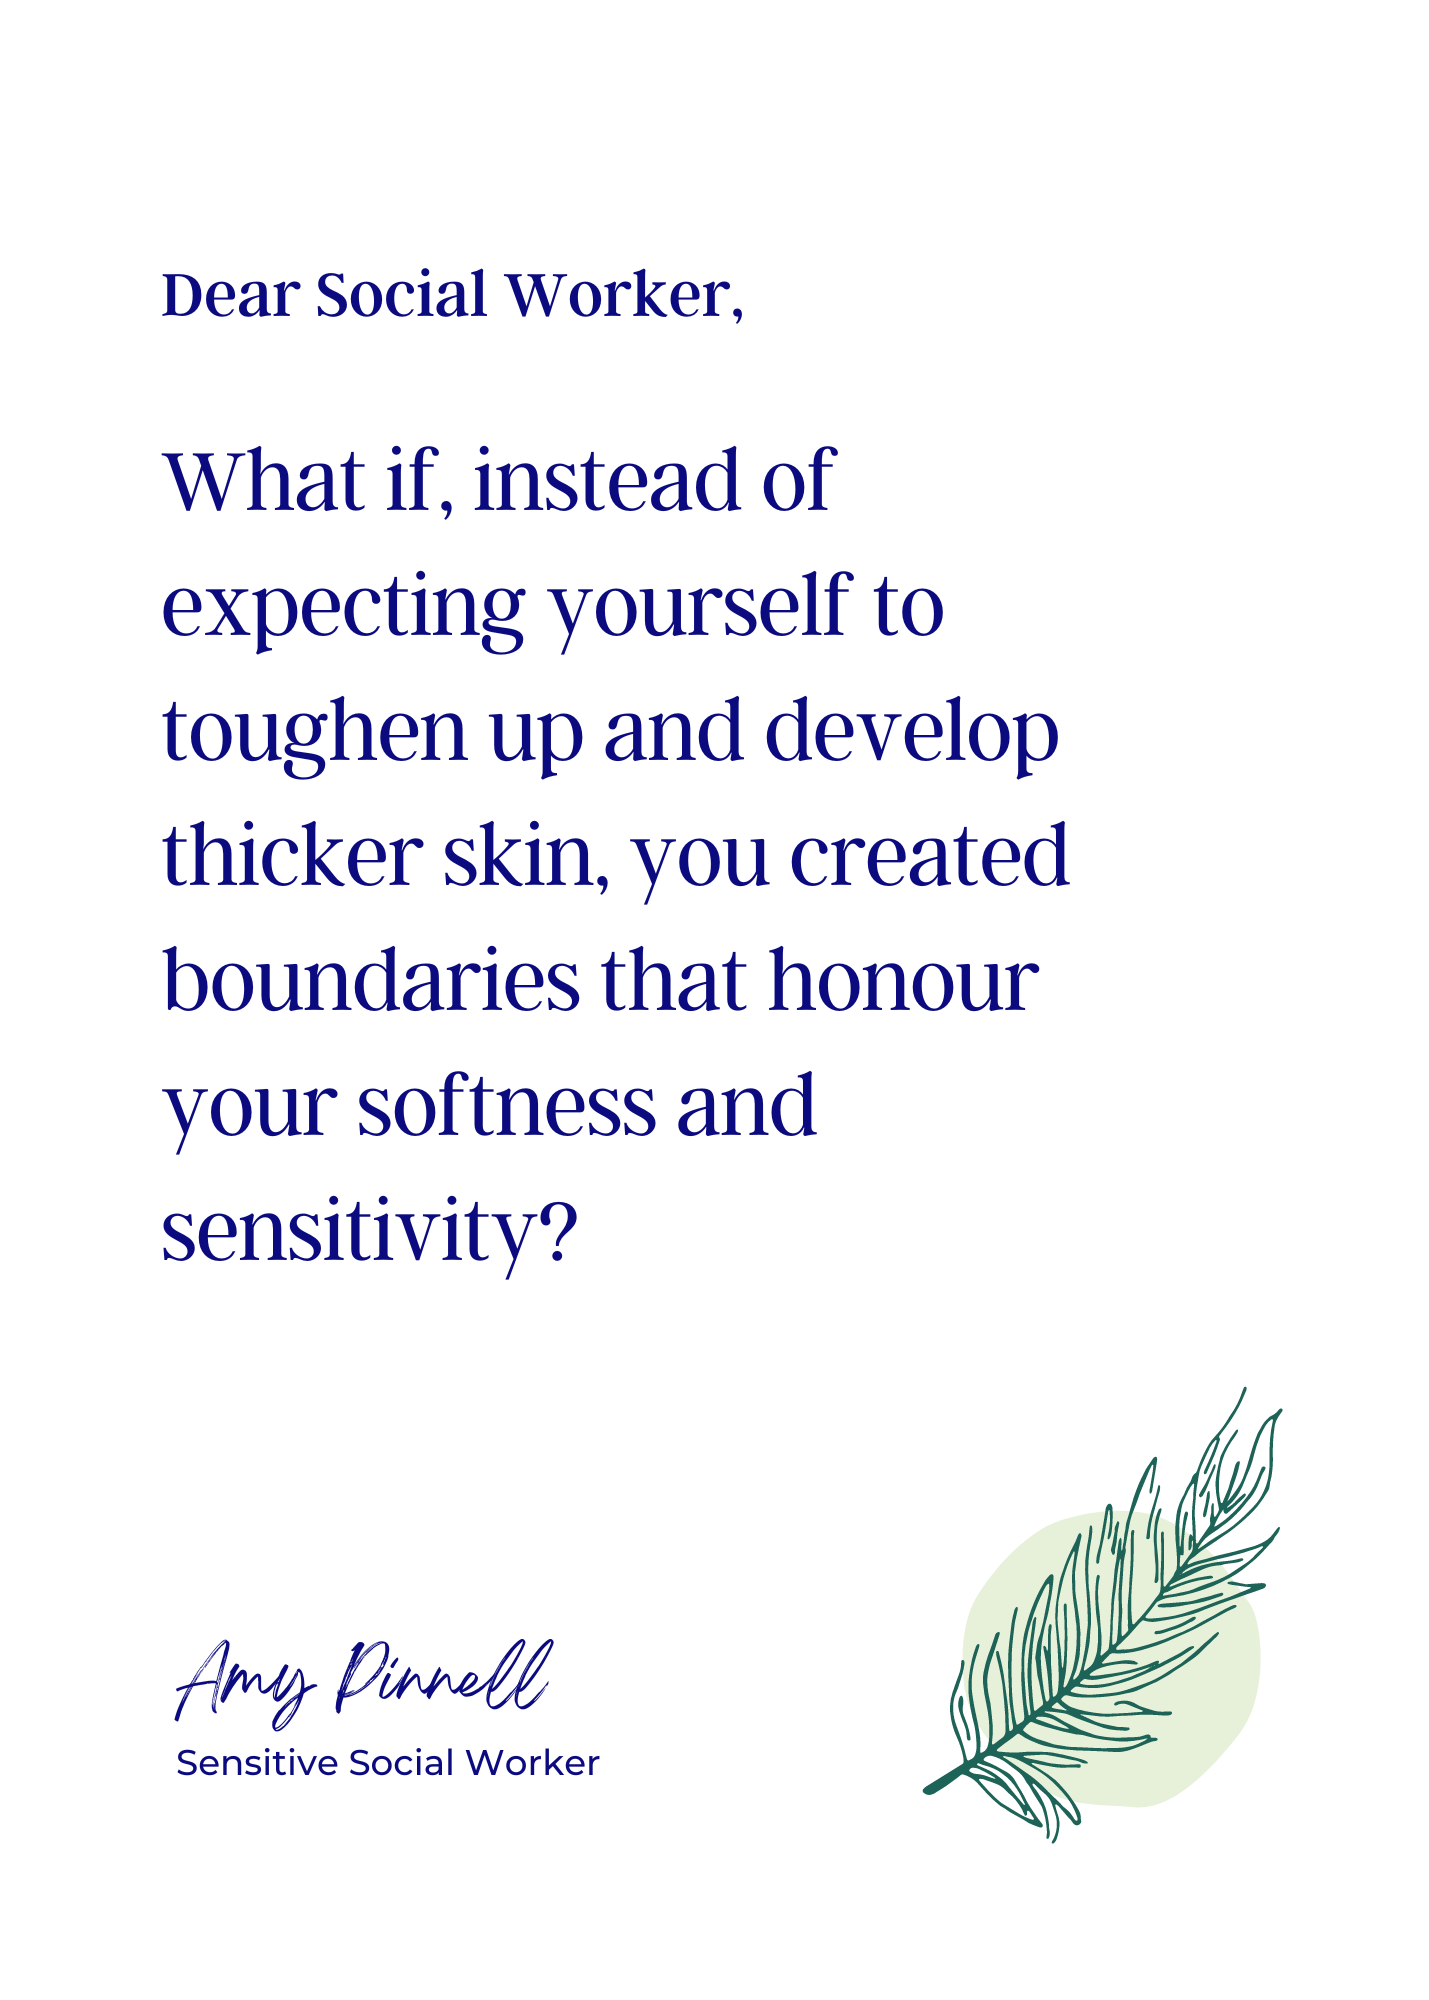 An electronic version of the print is shown. The print is white with purple font which reads "Dear Social Worker, What if, instead of expecting yourself to toughen up and develop thicker skin, you created boundaries that honour your softness and sensitivity? Amy Pinnell, Sensitive Social Worker". There is a dark green sketch of feather in the bottom right corner. 